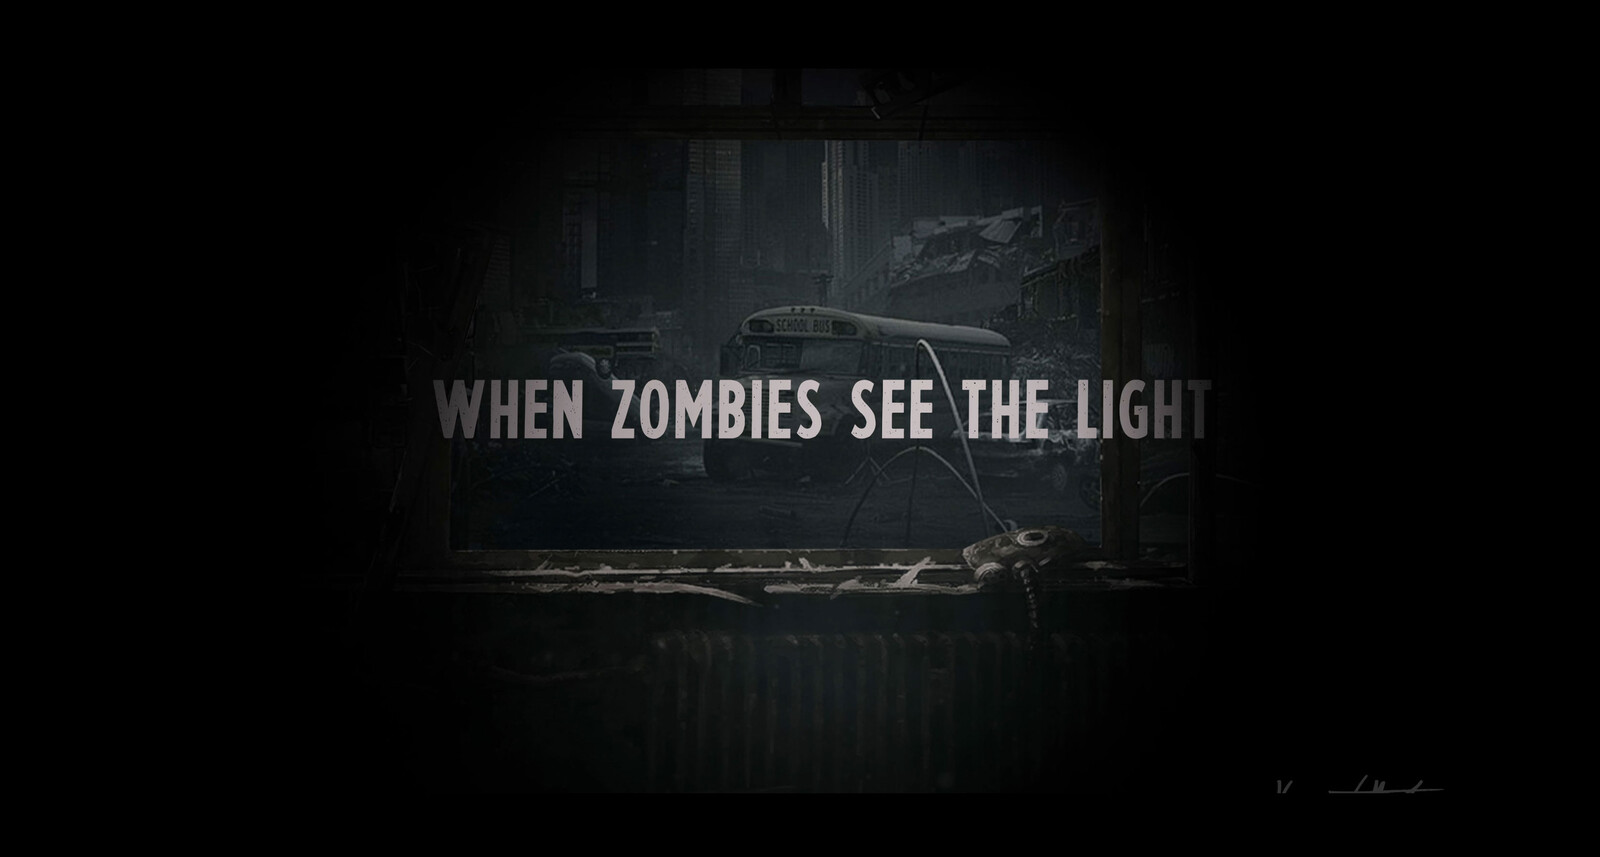 WHEN ZOMBIES SEE THE LIGHT